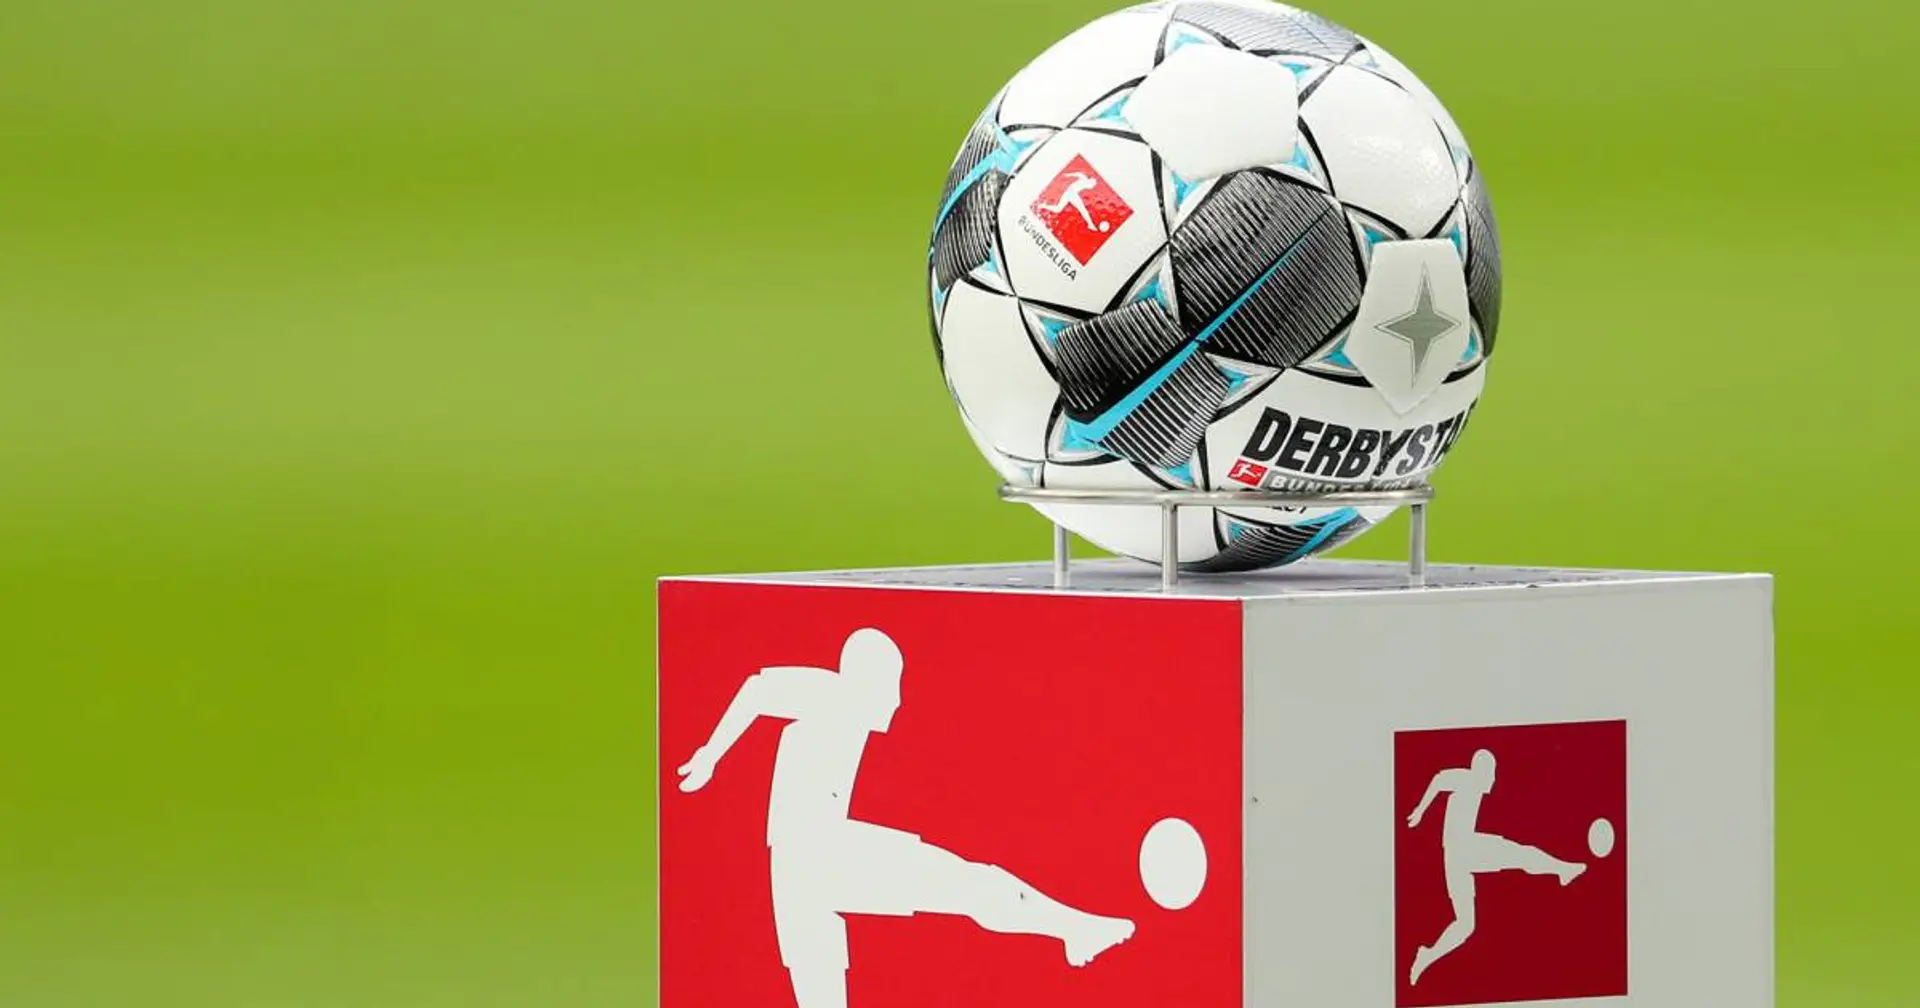 Bundesliga's plan to restart campaign on May 9 explained in 6 key points